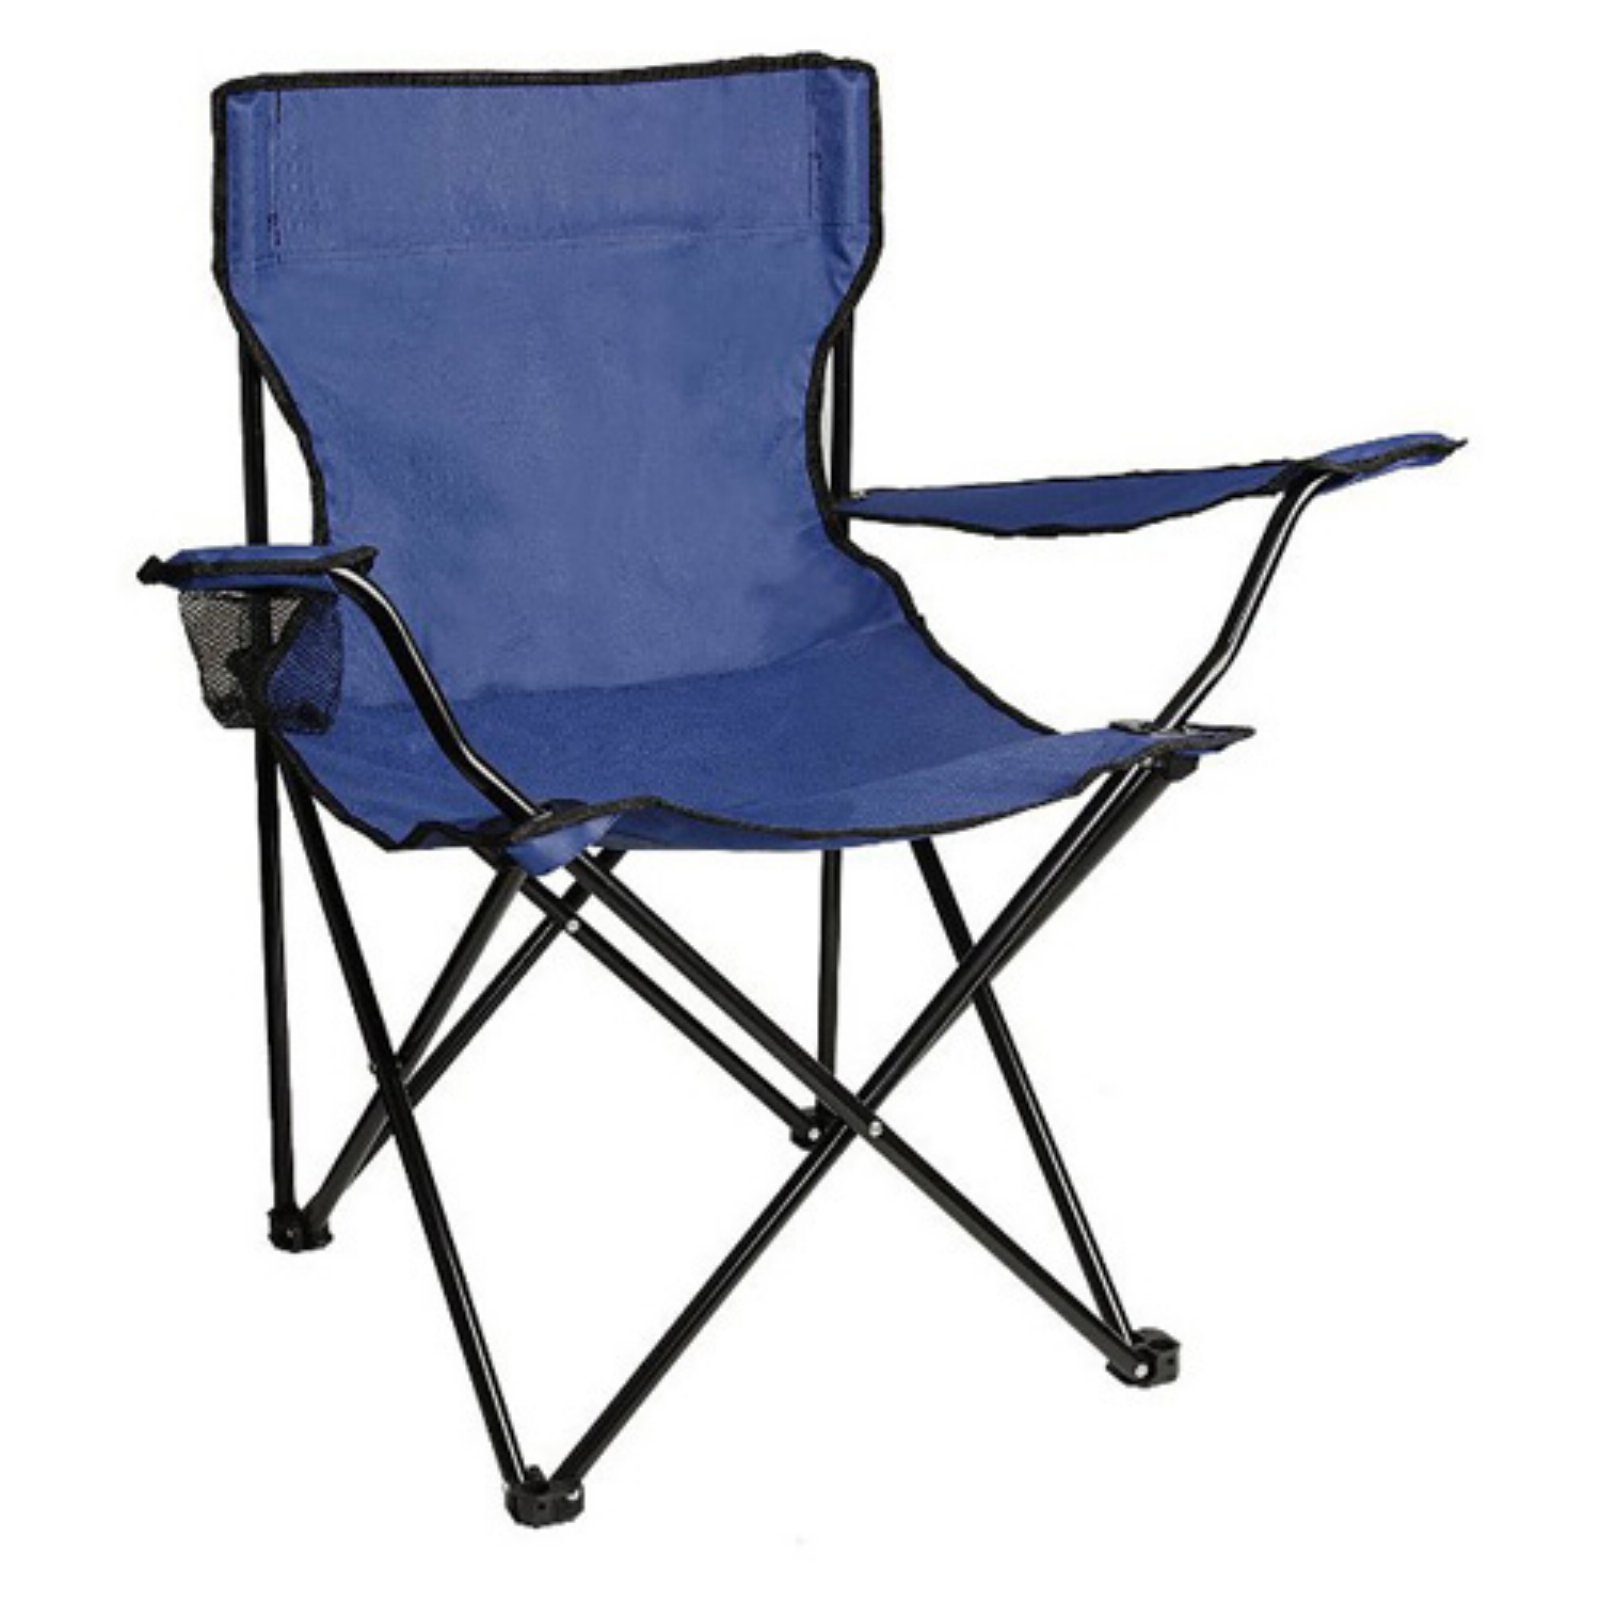 ALEKO BC01 Foldable Camping Hiking Beach Chair Outdoor Picnic Lounge Patio Lawn Garden Chair, Dark Blue - image 2 of 2